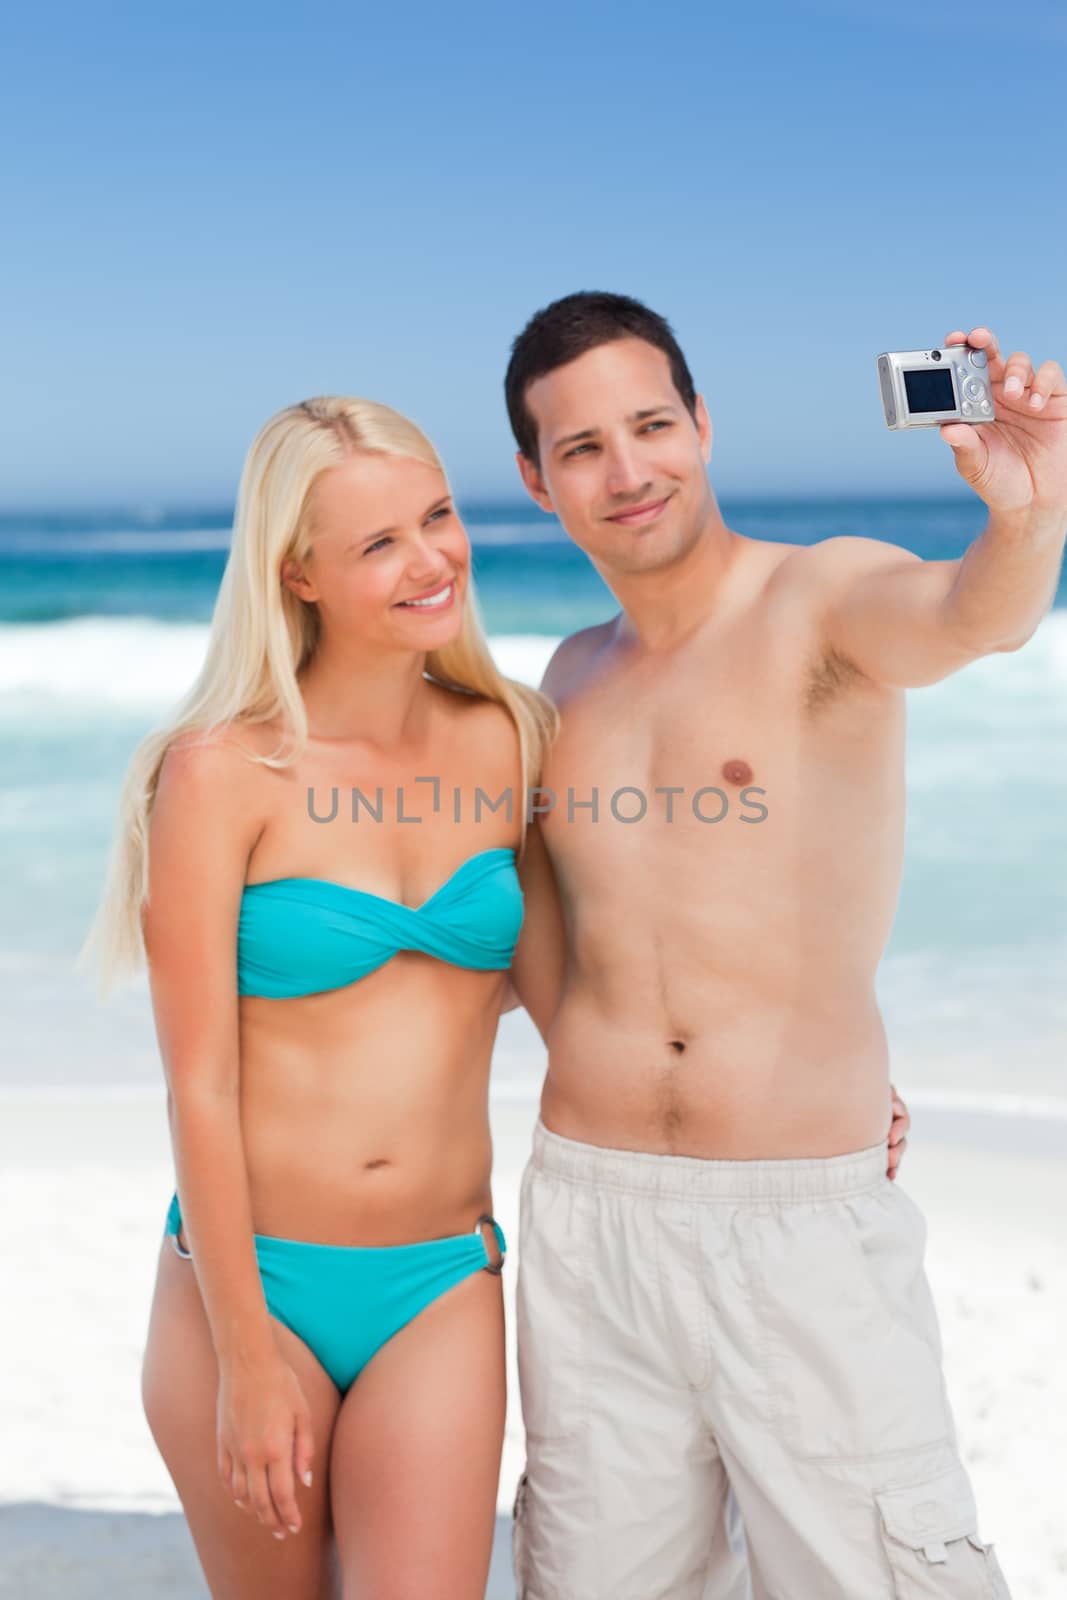 Couple taking a photo of themselves on the beach by Wavebreakmedia